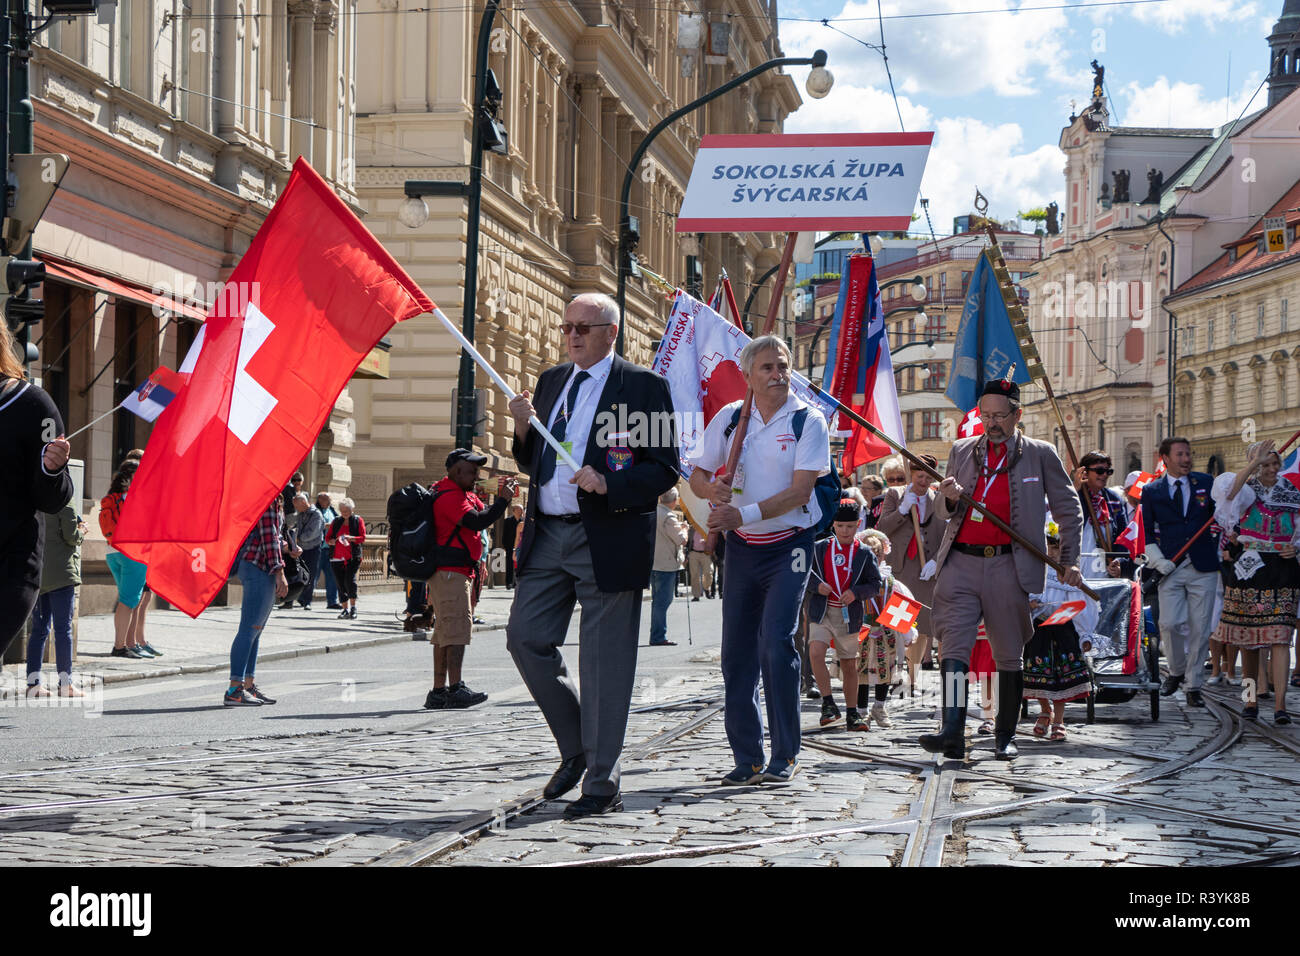 PRAGUE, CZECH REPUBLIC - JULY 1, 2018: Swiss visitors parading at Sokolsky Slet, a once-every-six-years gathering of the Sokol movement - a Czech spor Stock Photo